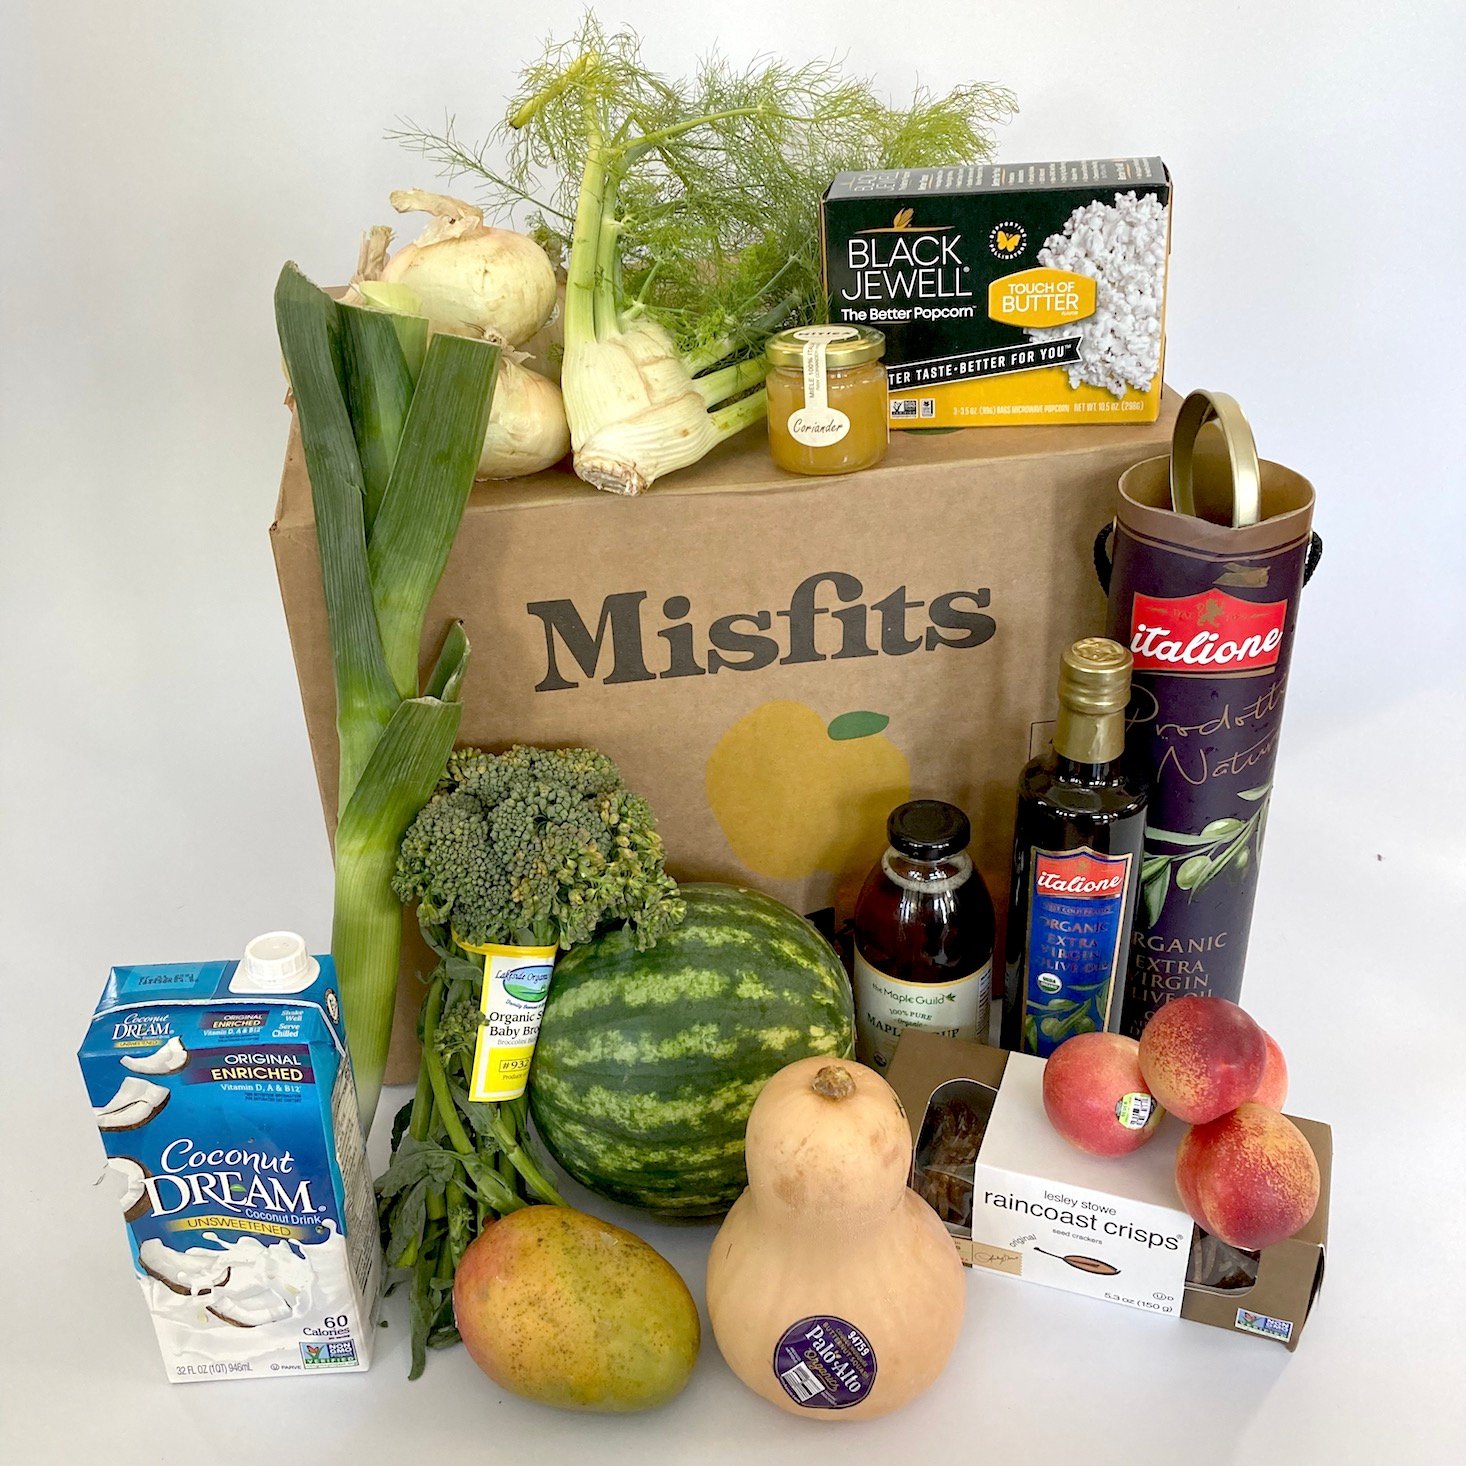 Misfits Market Review – Everything You Need to Know About This Sustainable Grocery Delivery Service